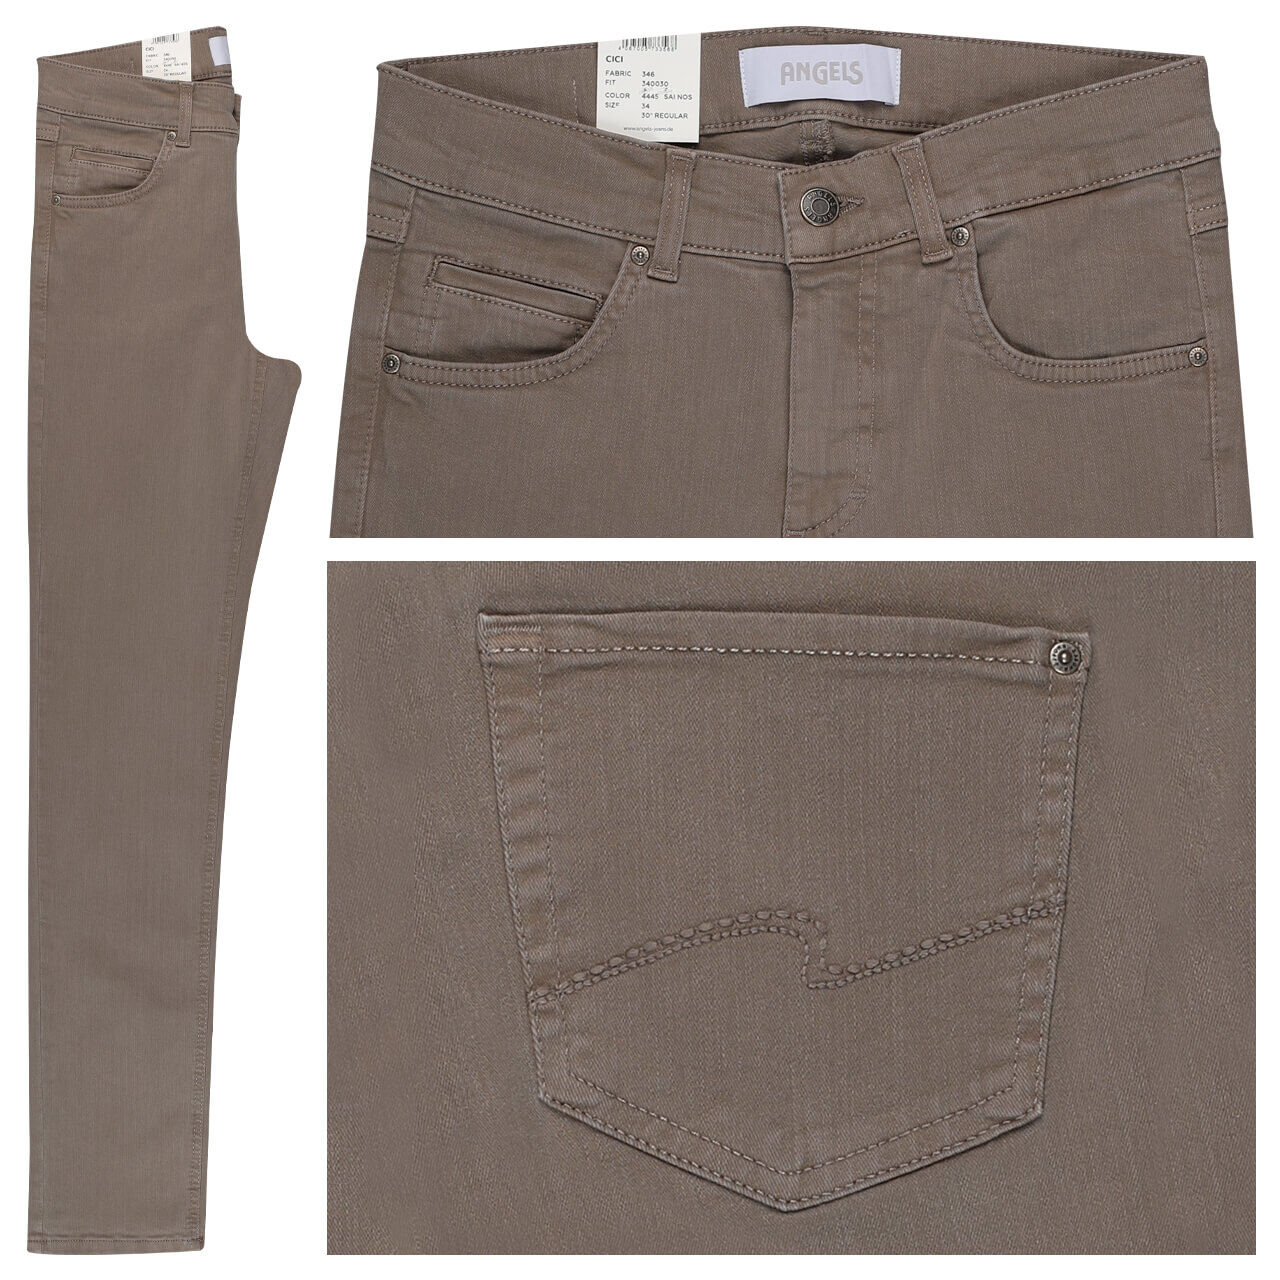 Angels Cici Jeans truffle brown used